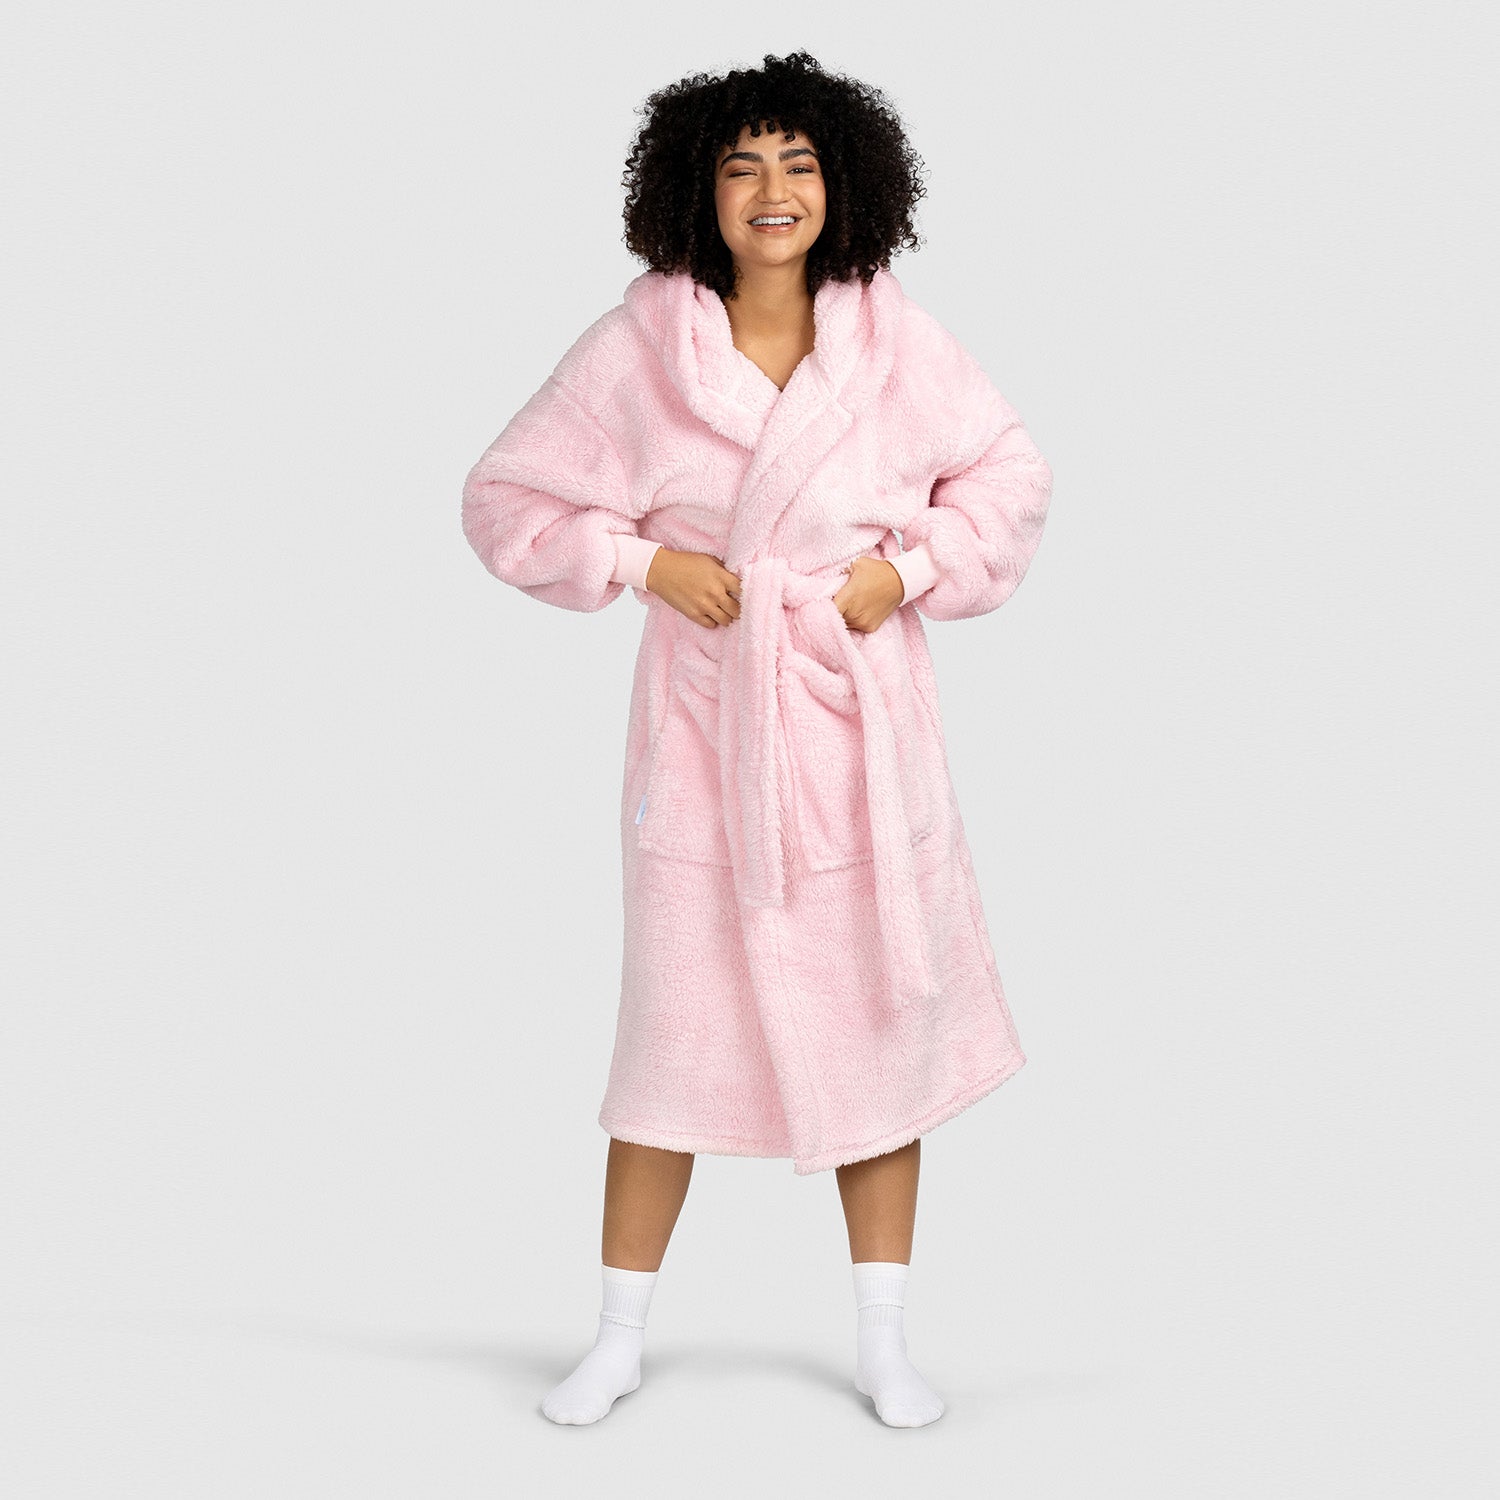 Bathrobes for Women Canada: 10 Perfect Robes to Gift 2022